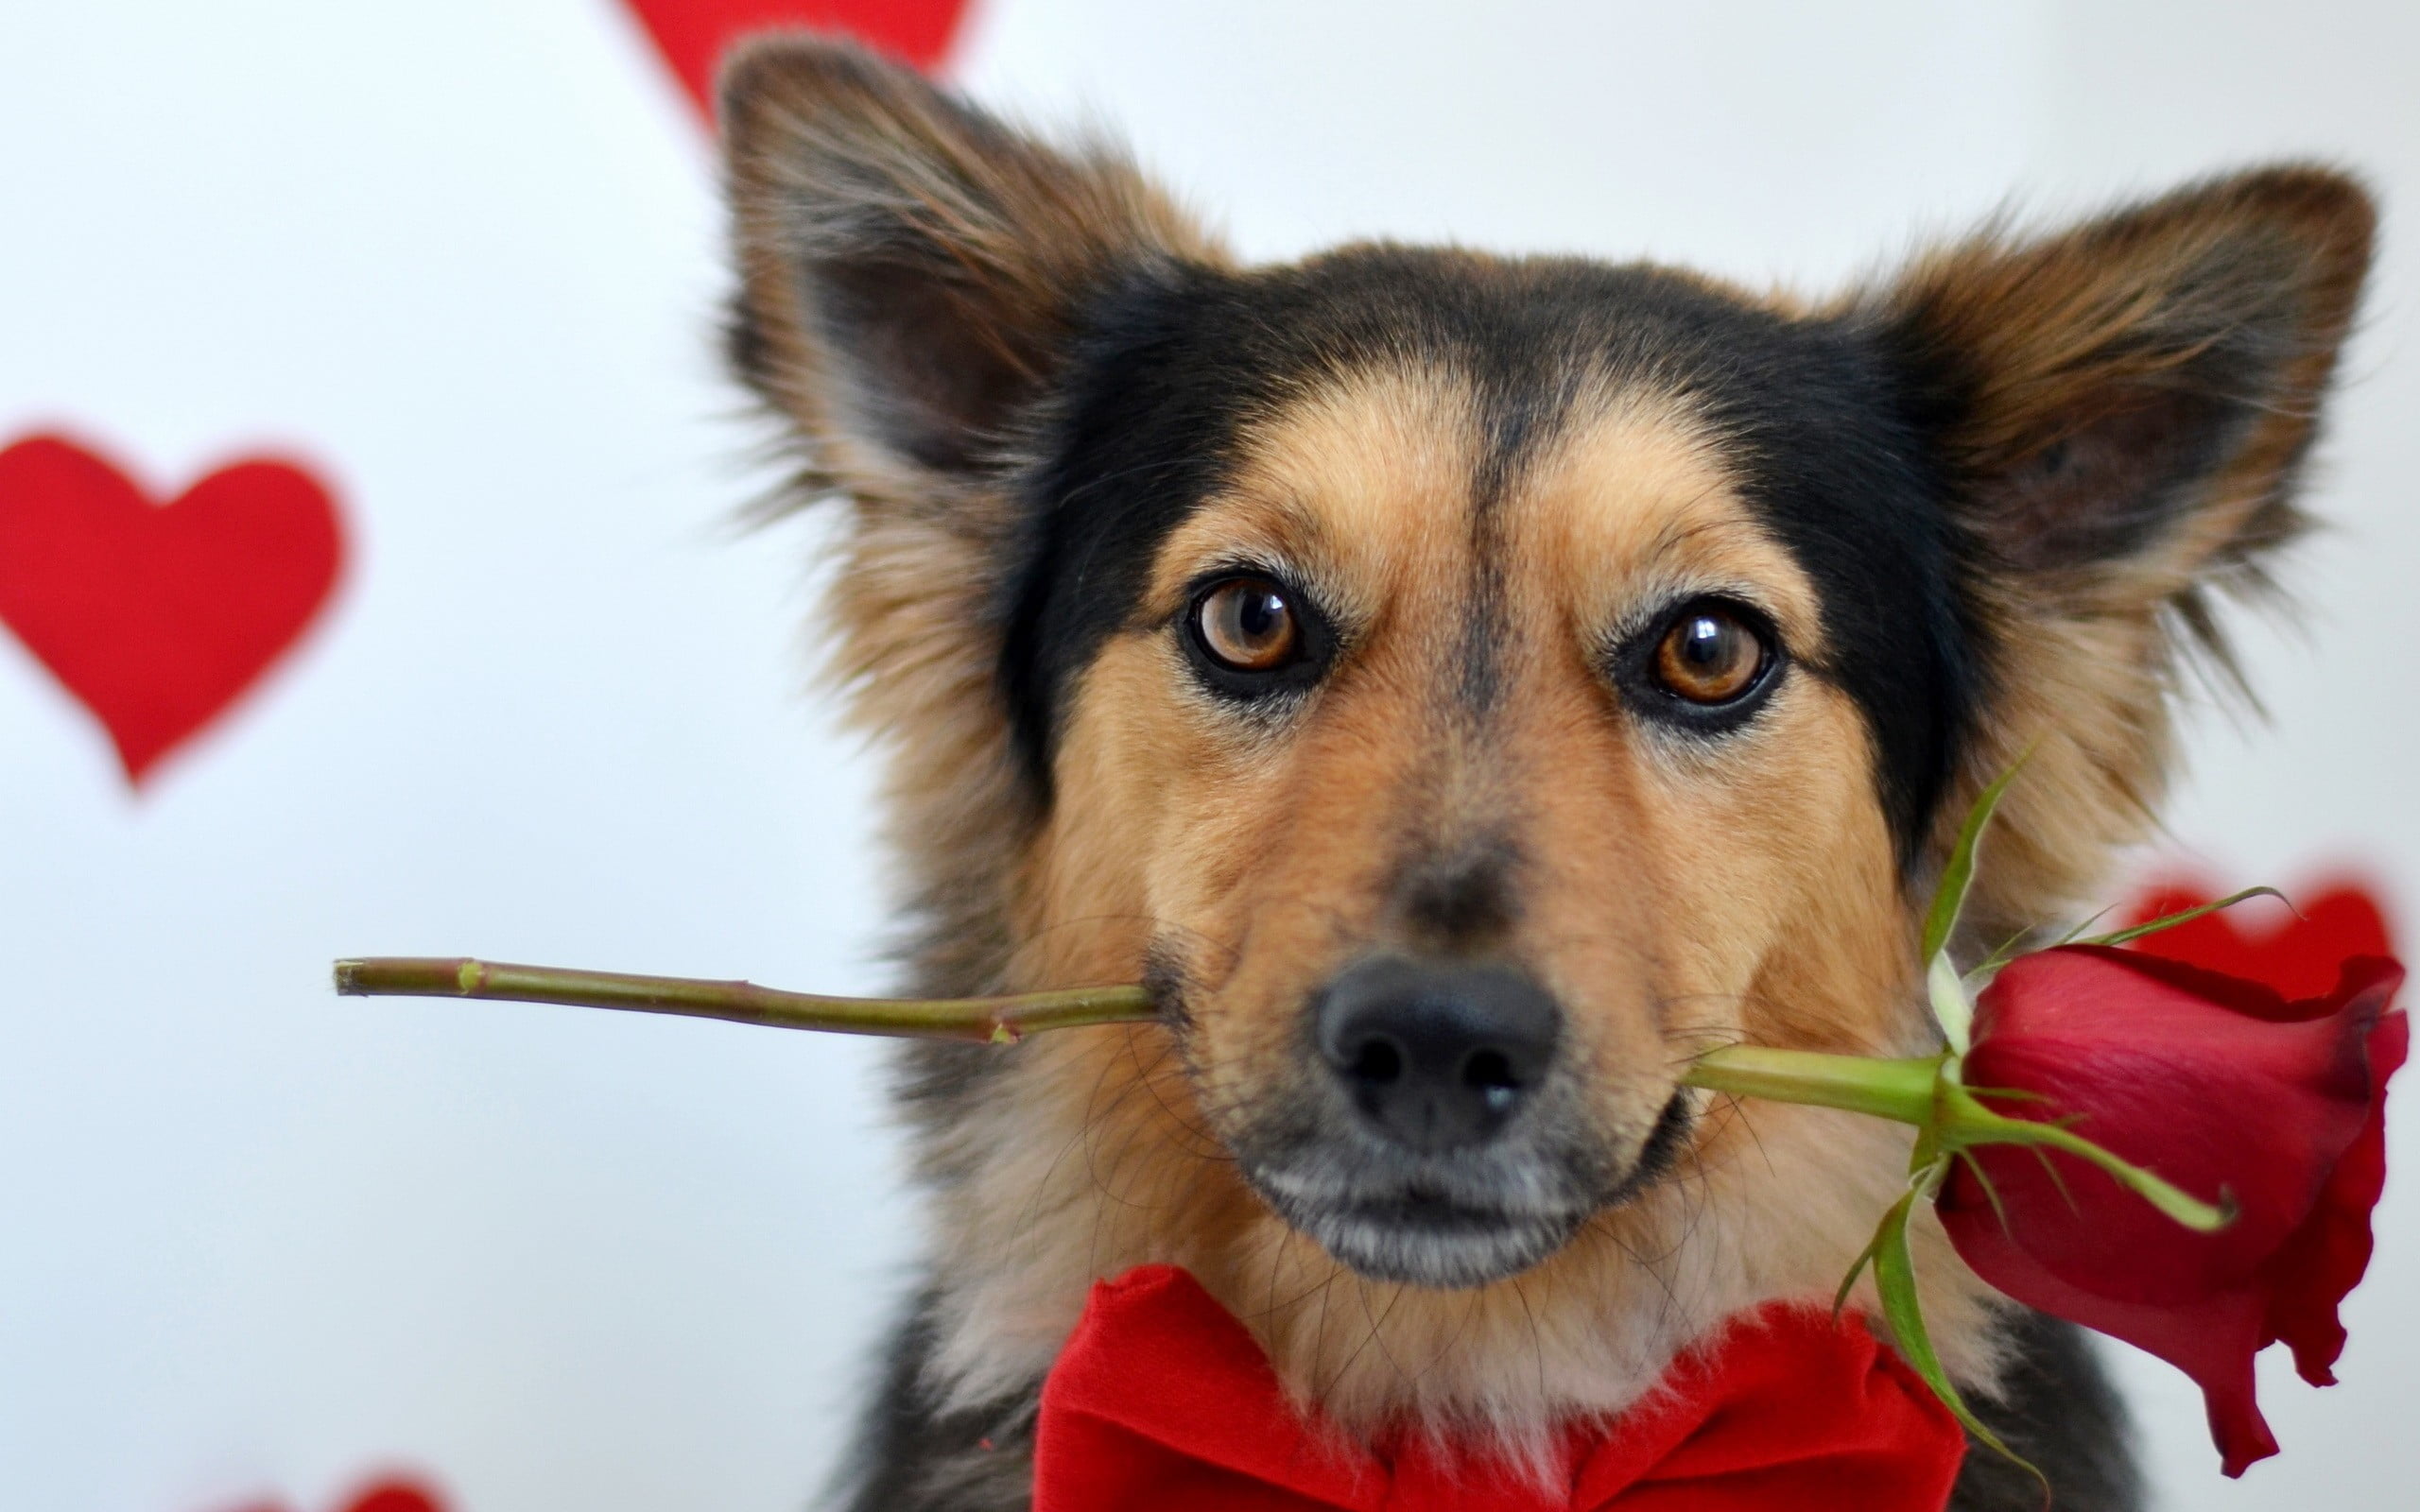 animals, dog, rose, red flowers, one animal, canine, domestic